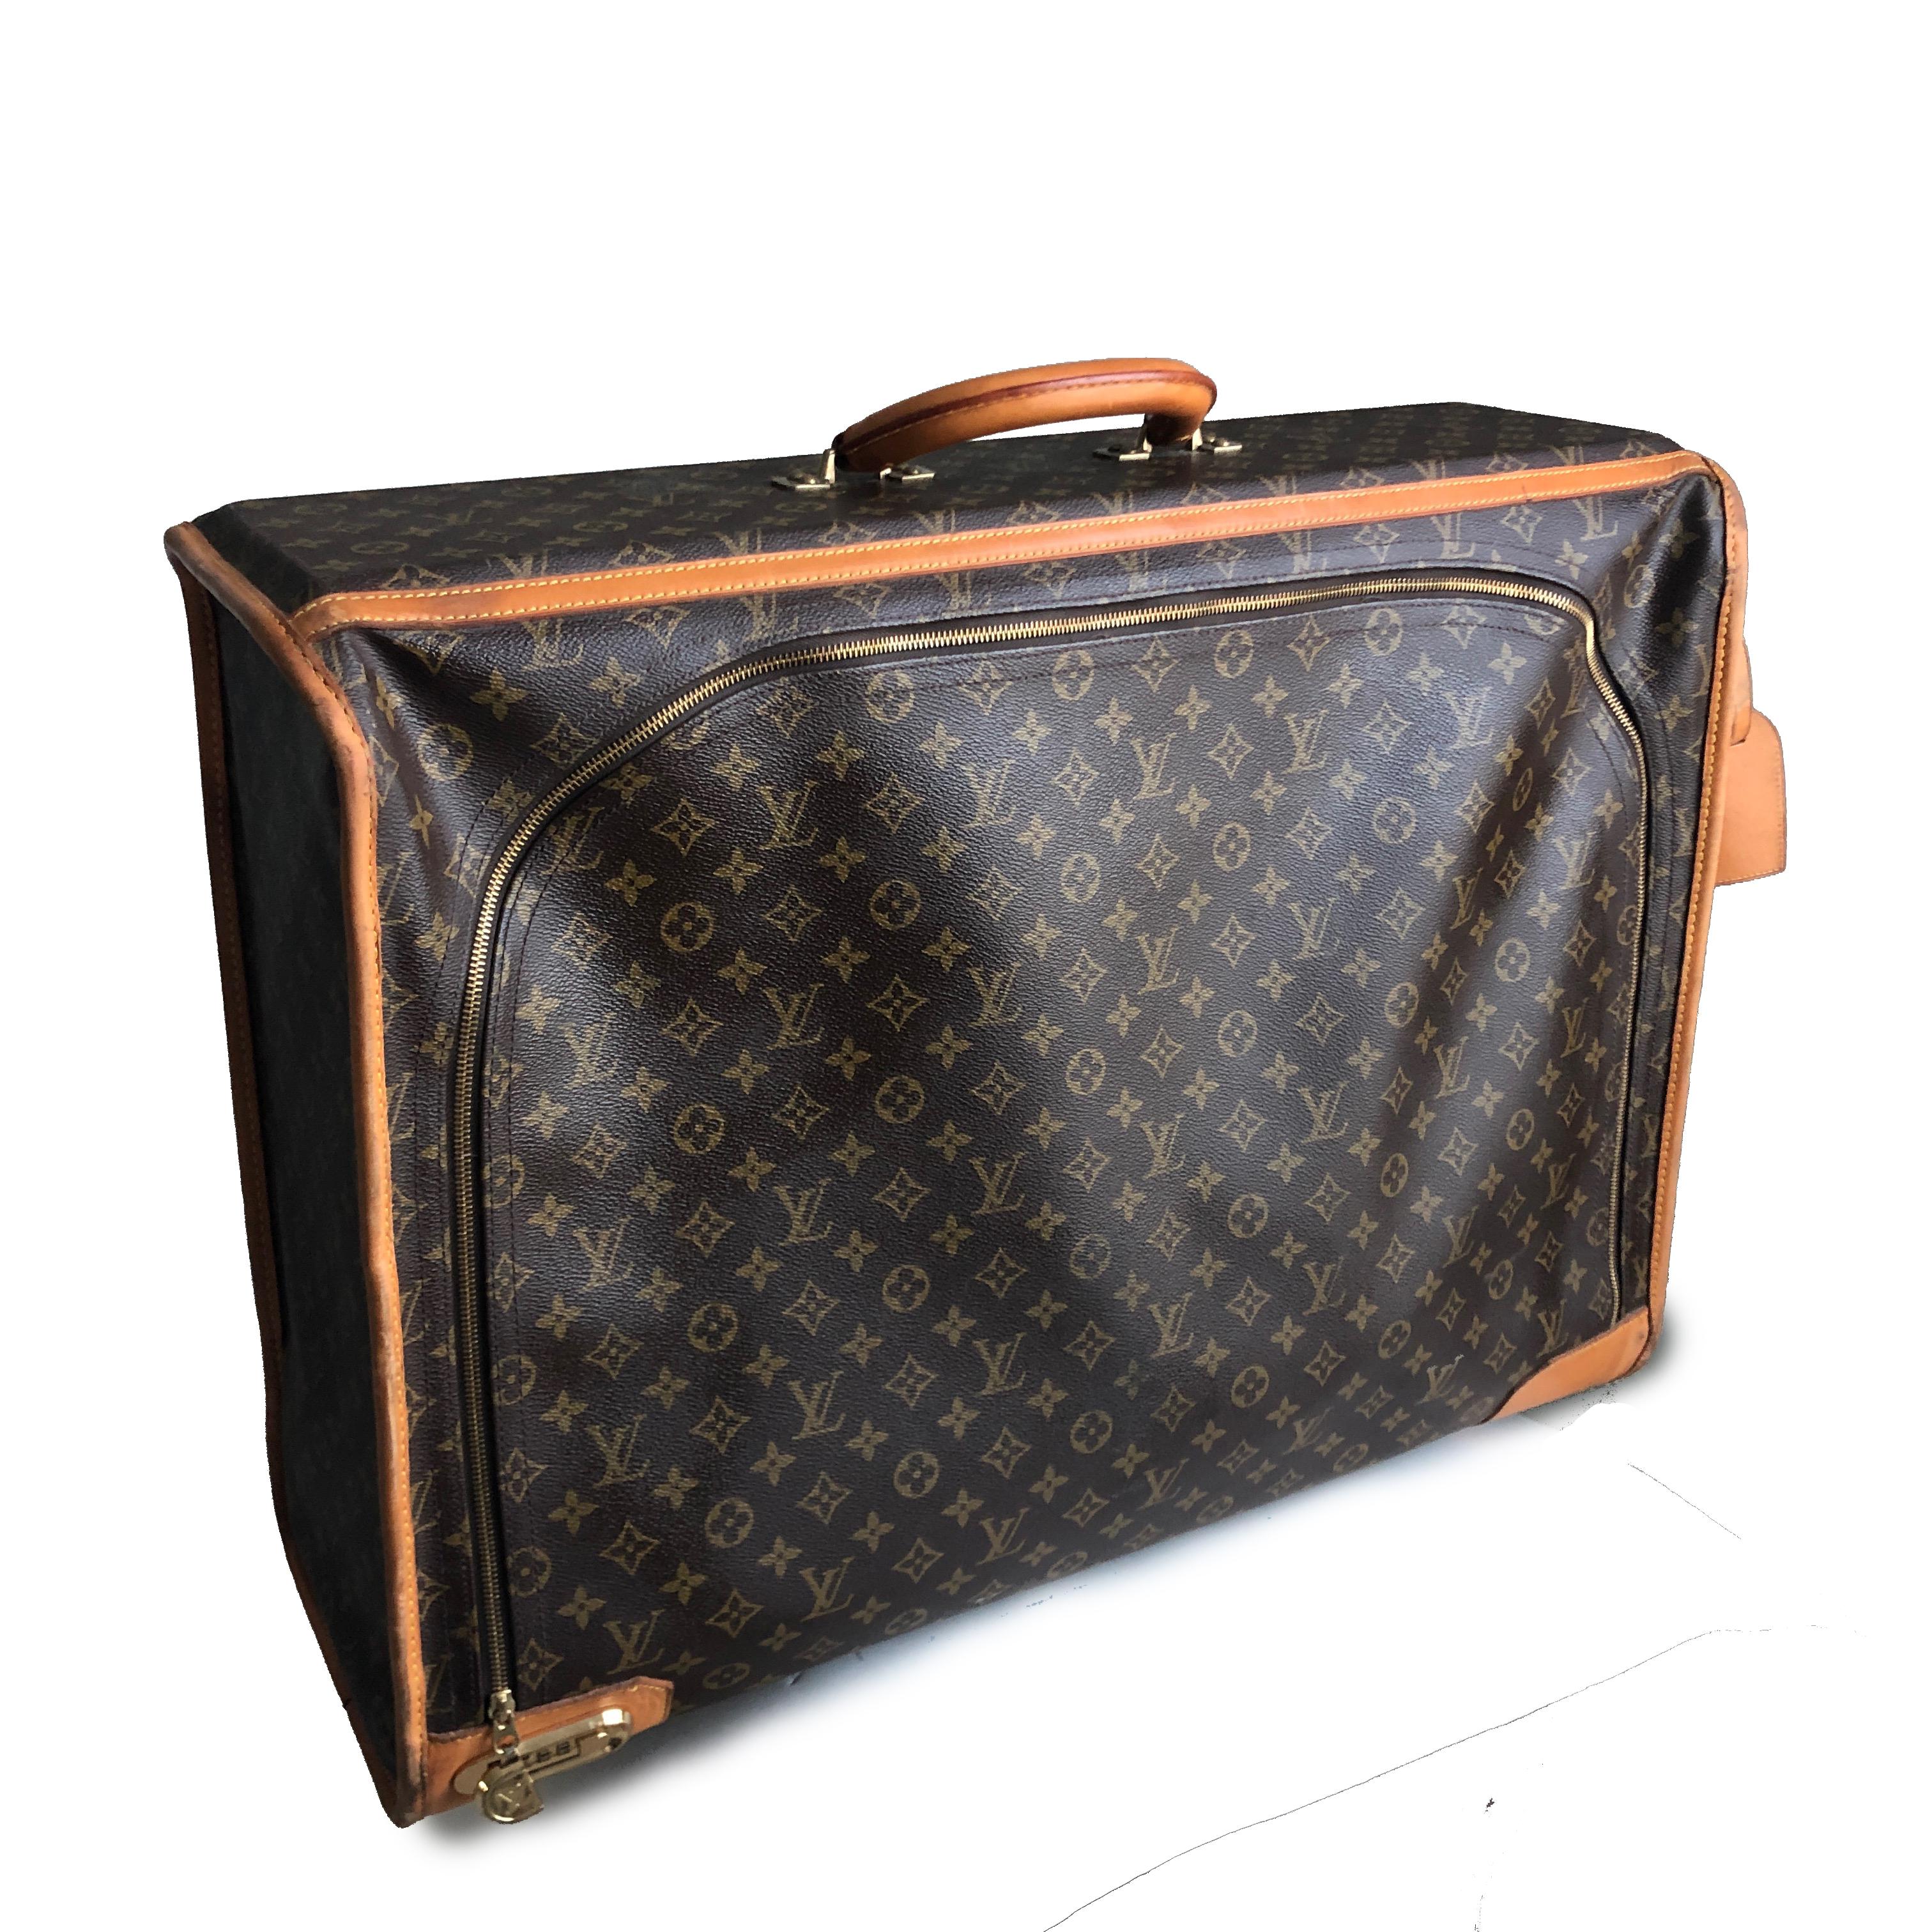 Travel in style with vintage Louis Vuitton luggage!  Made around the 80s, this large monogram canvas suitcase is trimmed in vachetta leather and features a built-in combination lock and leather ID Tag.  It's lined in brown fabric with two removable,